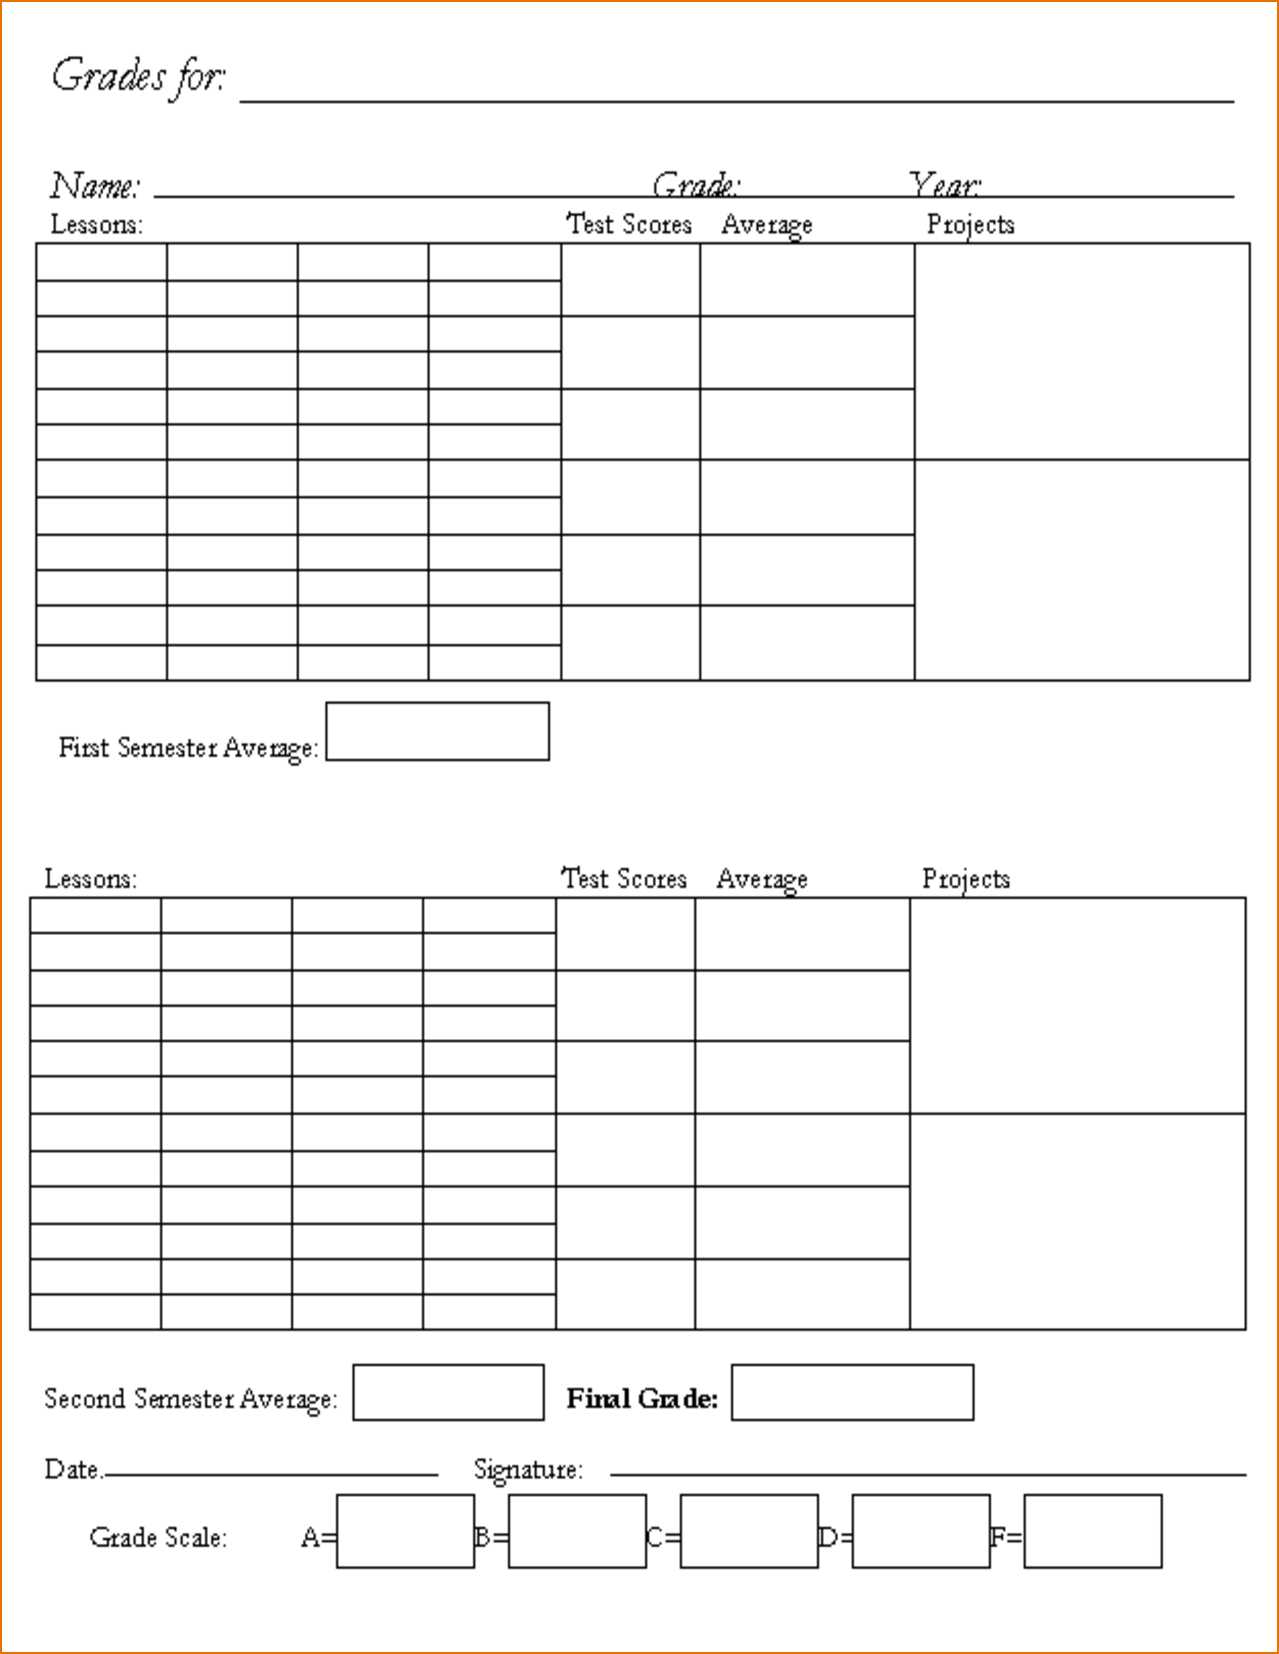 Name Card Template For Kindergarten Throughout Boyfriend Inside Kindergarten Report Card Template